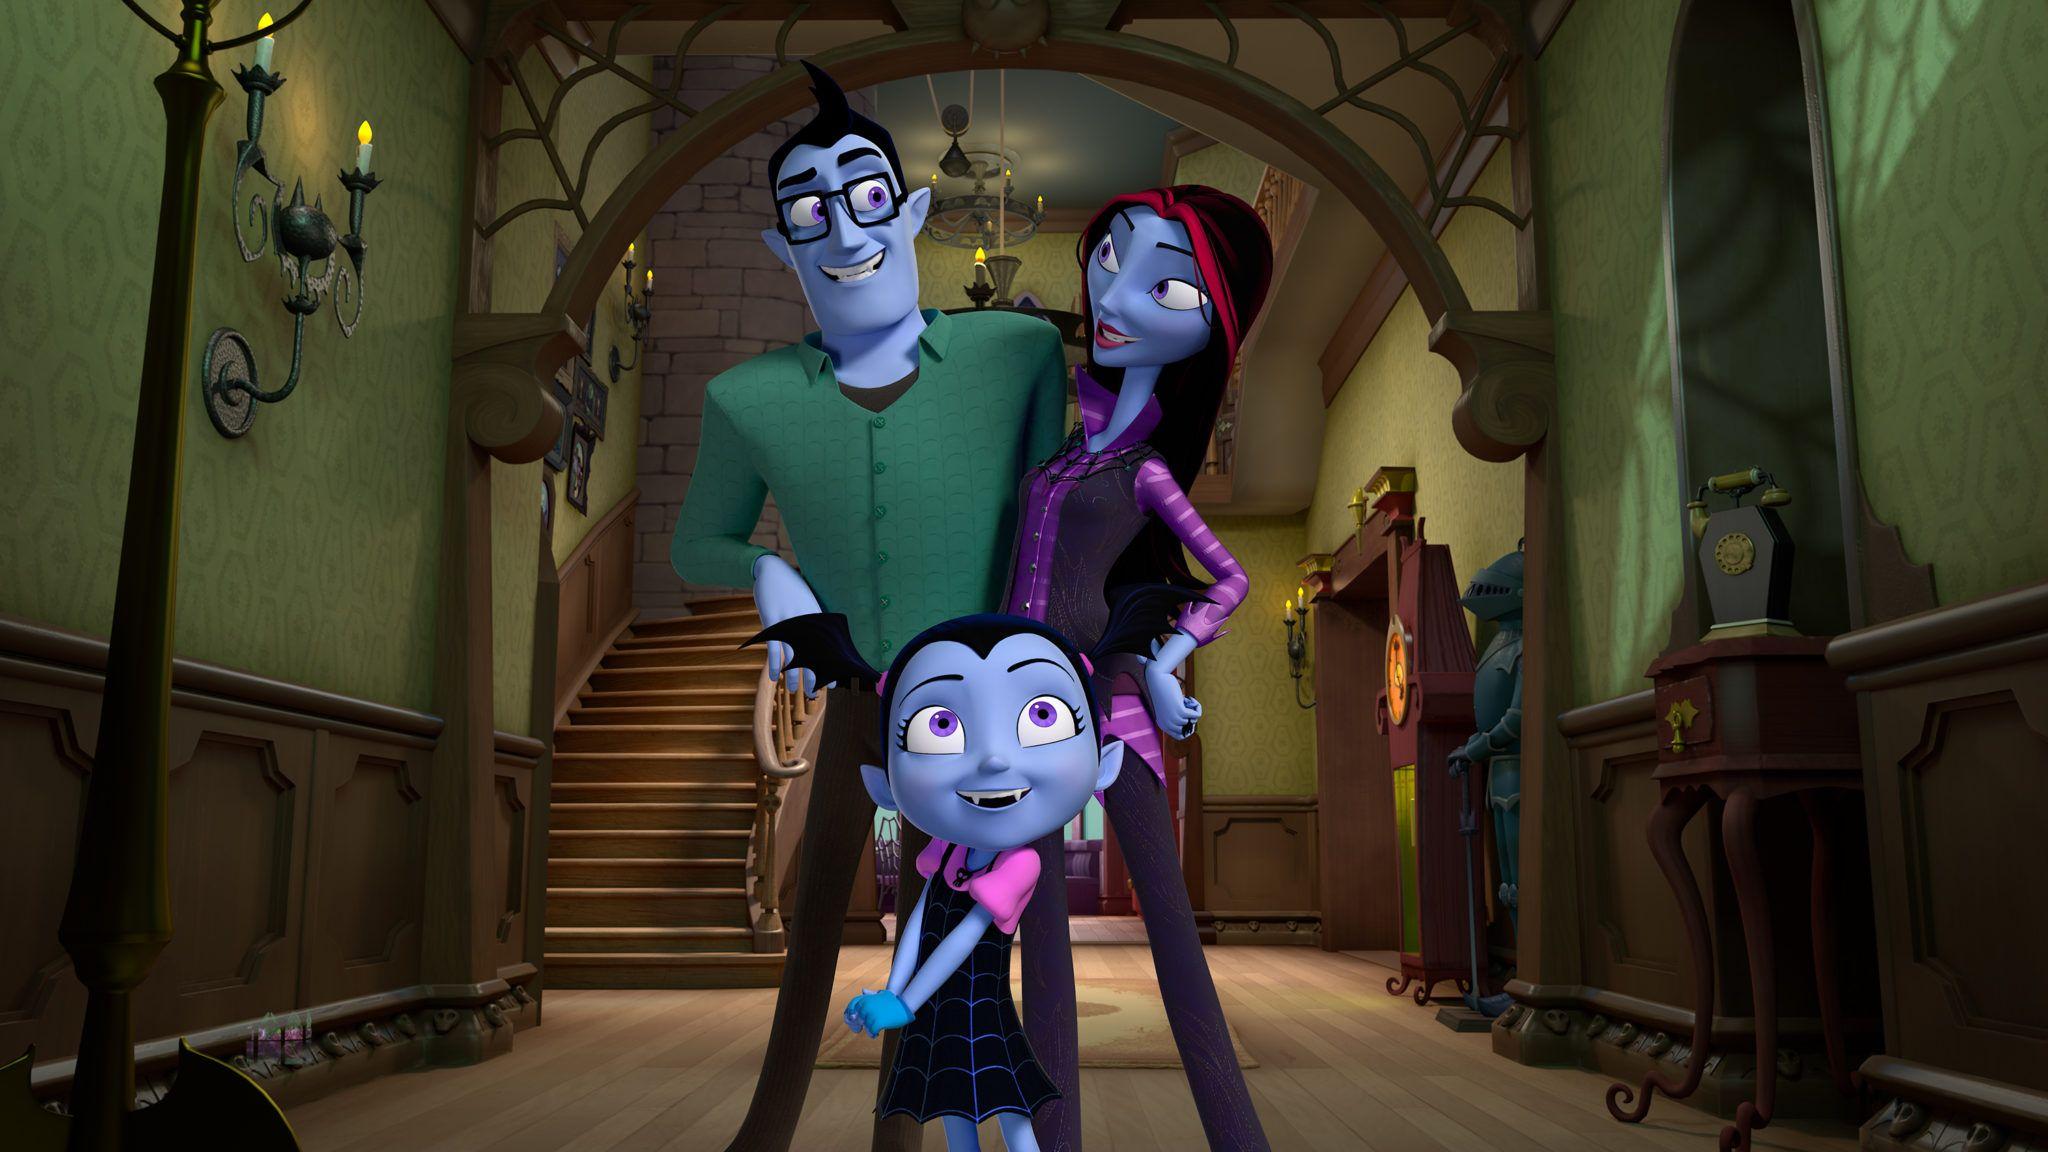 Check Out The New Vampirina Toys from Just Play